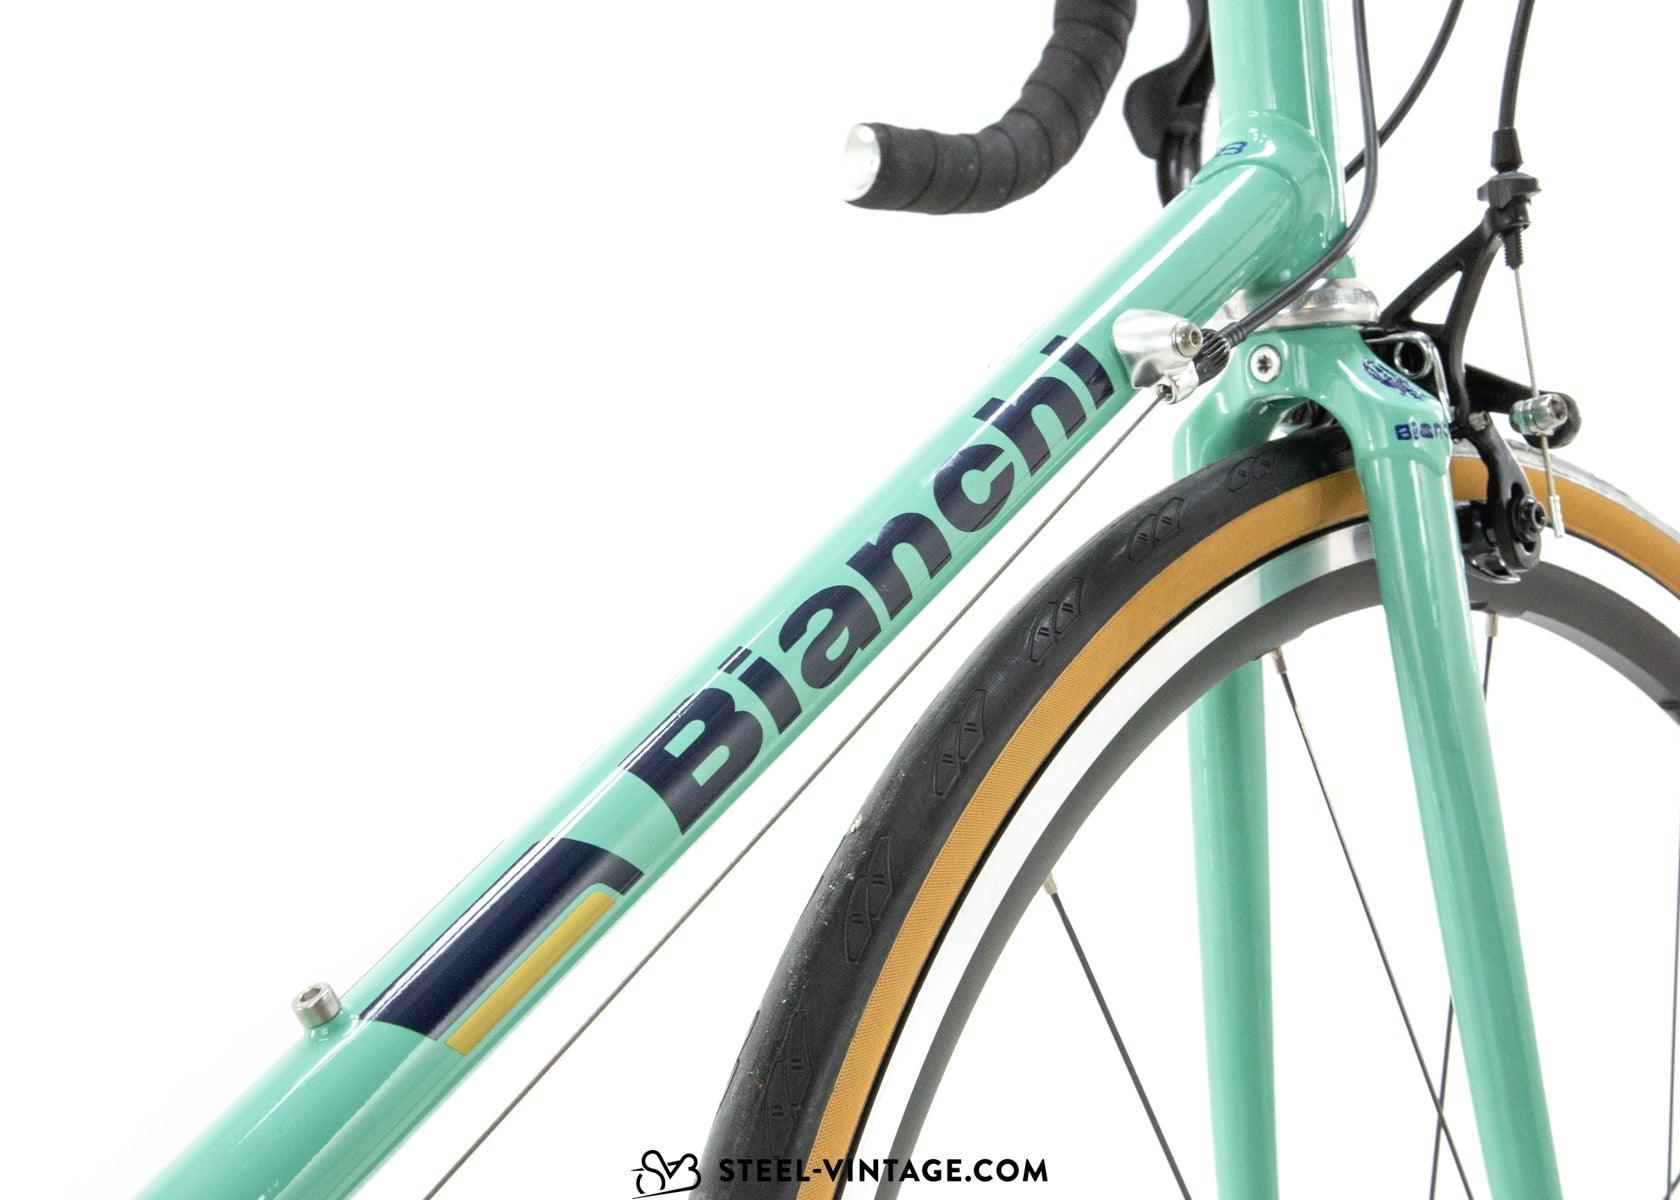 Bianchi Specialissima Neo Retro Bicycle Campagnolo Record 12s - Steel Vintage Bikes